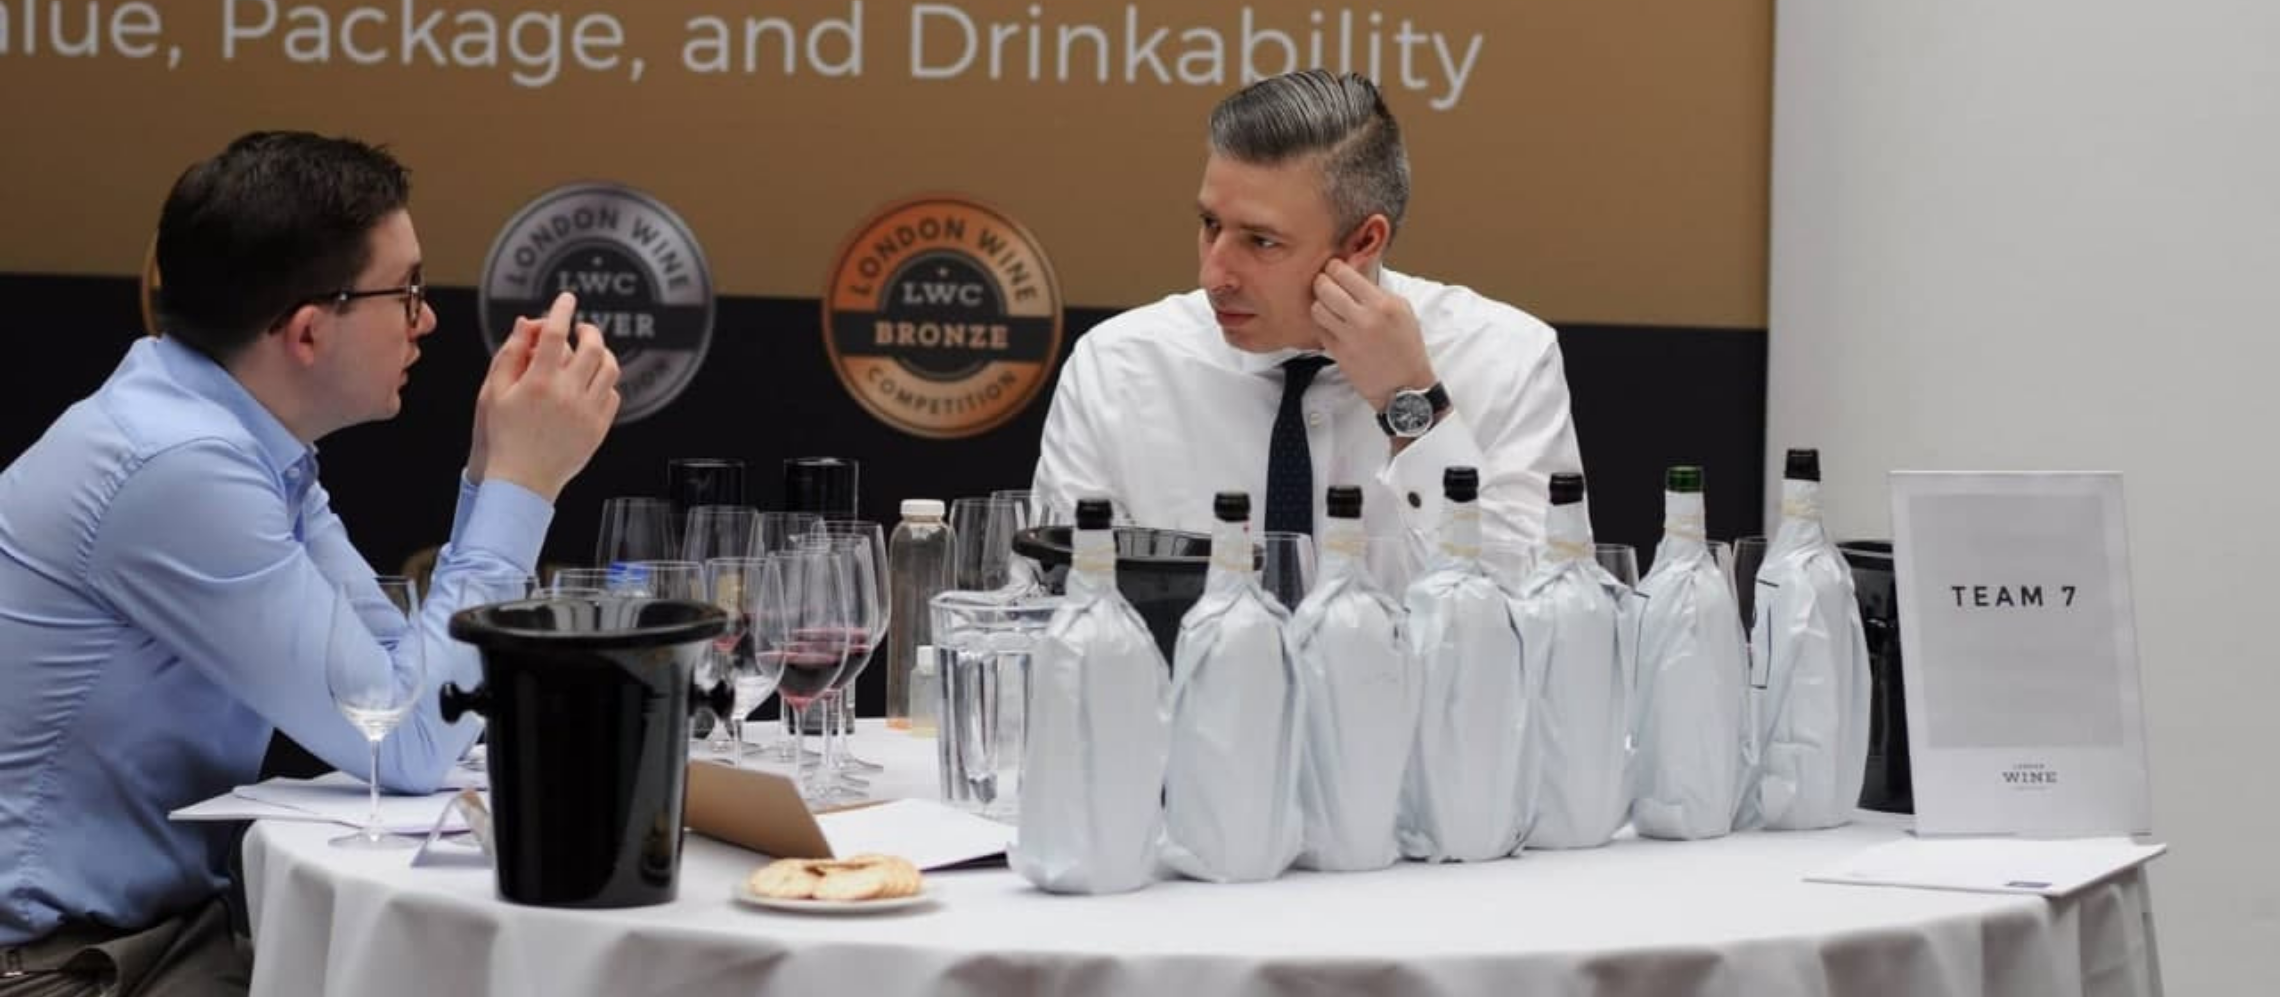 Photo for: London Wine Competition Registration Ends February 22, 2021